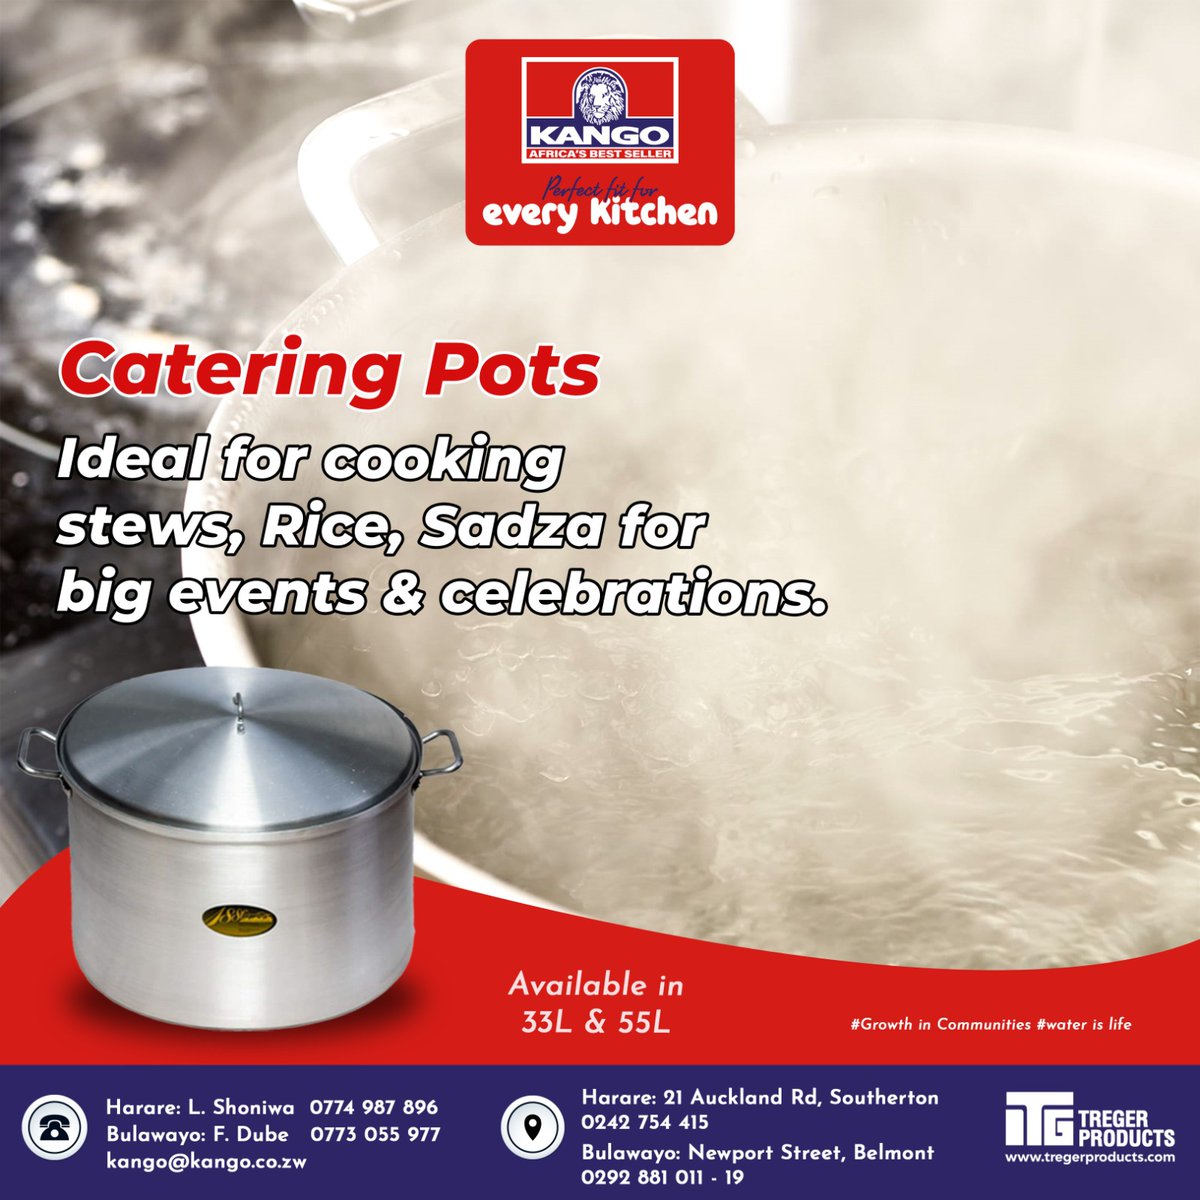 Cater for everyone this #easter with Kango Products